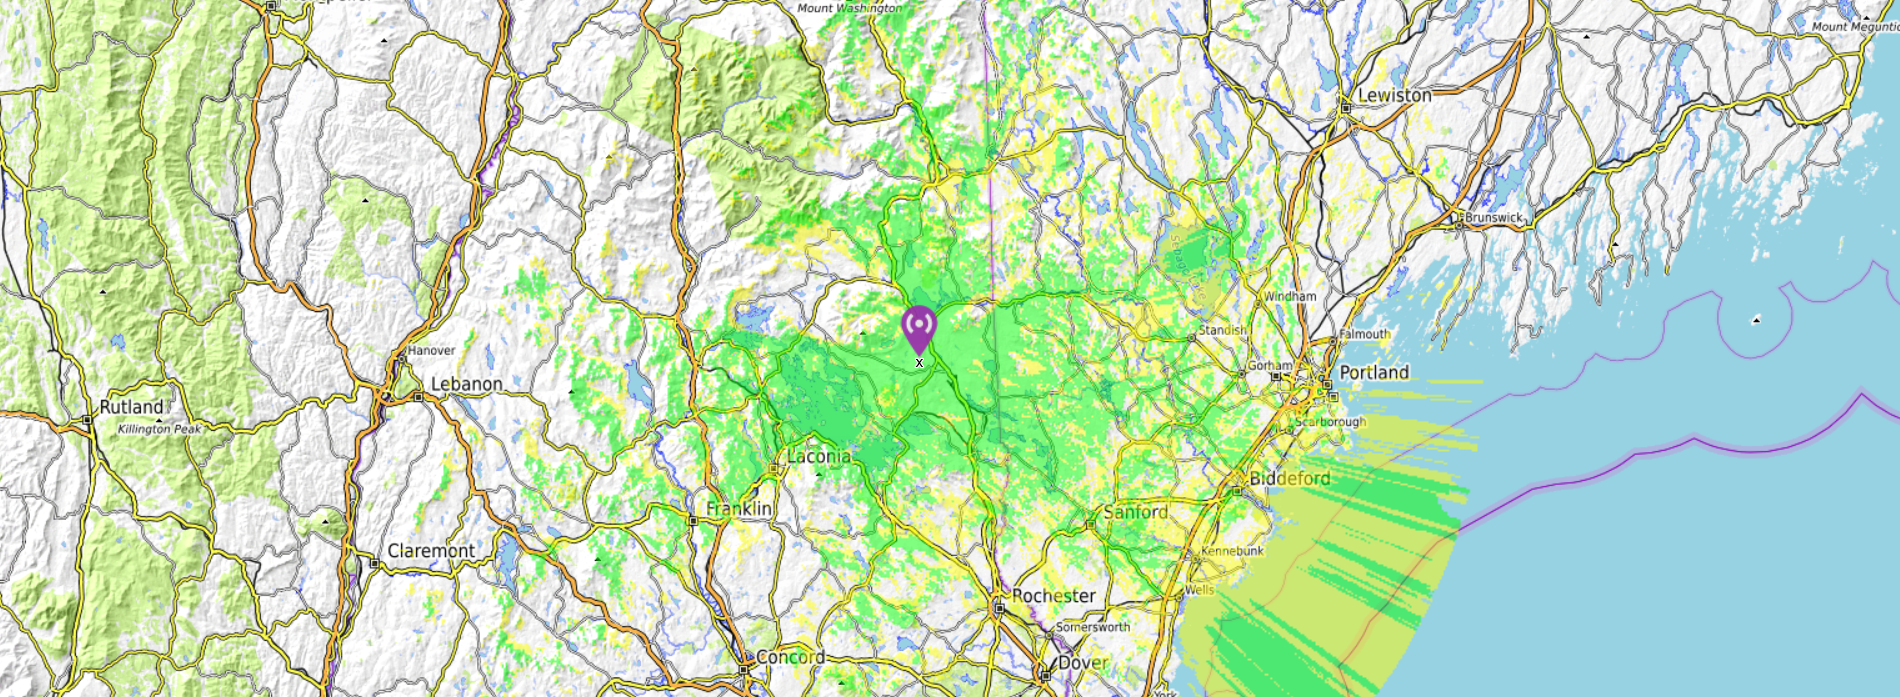 446.825 mhz rf coverage map